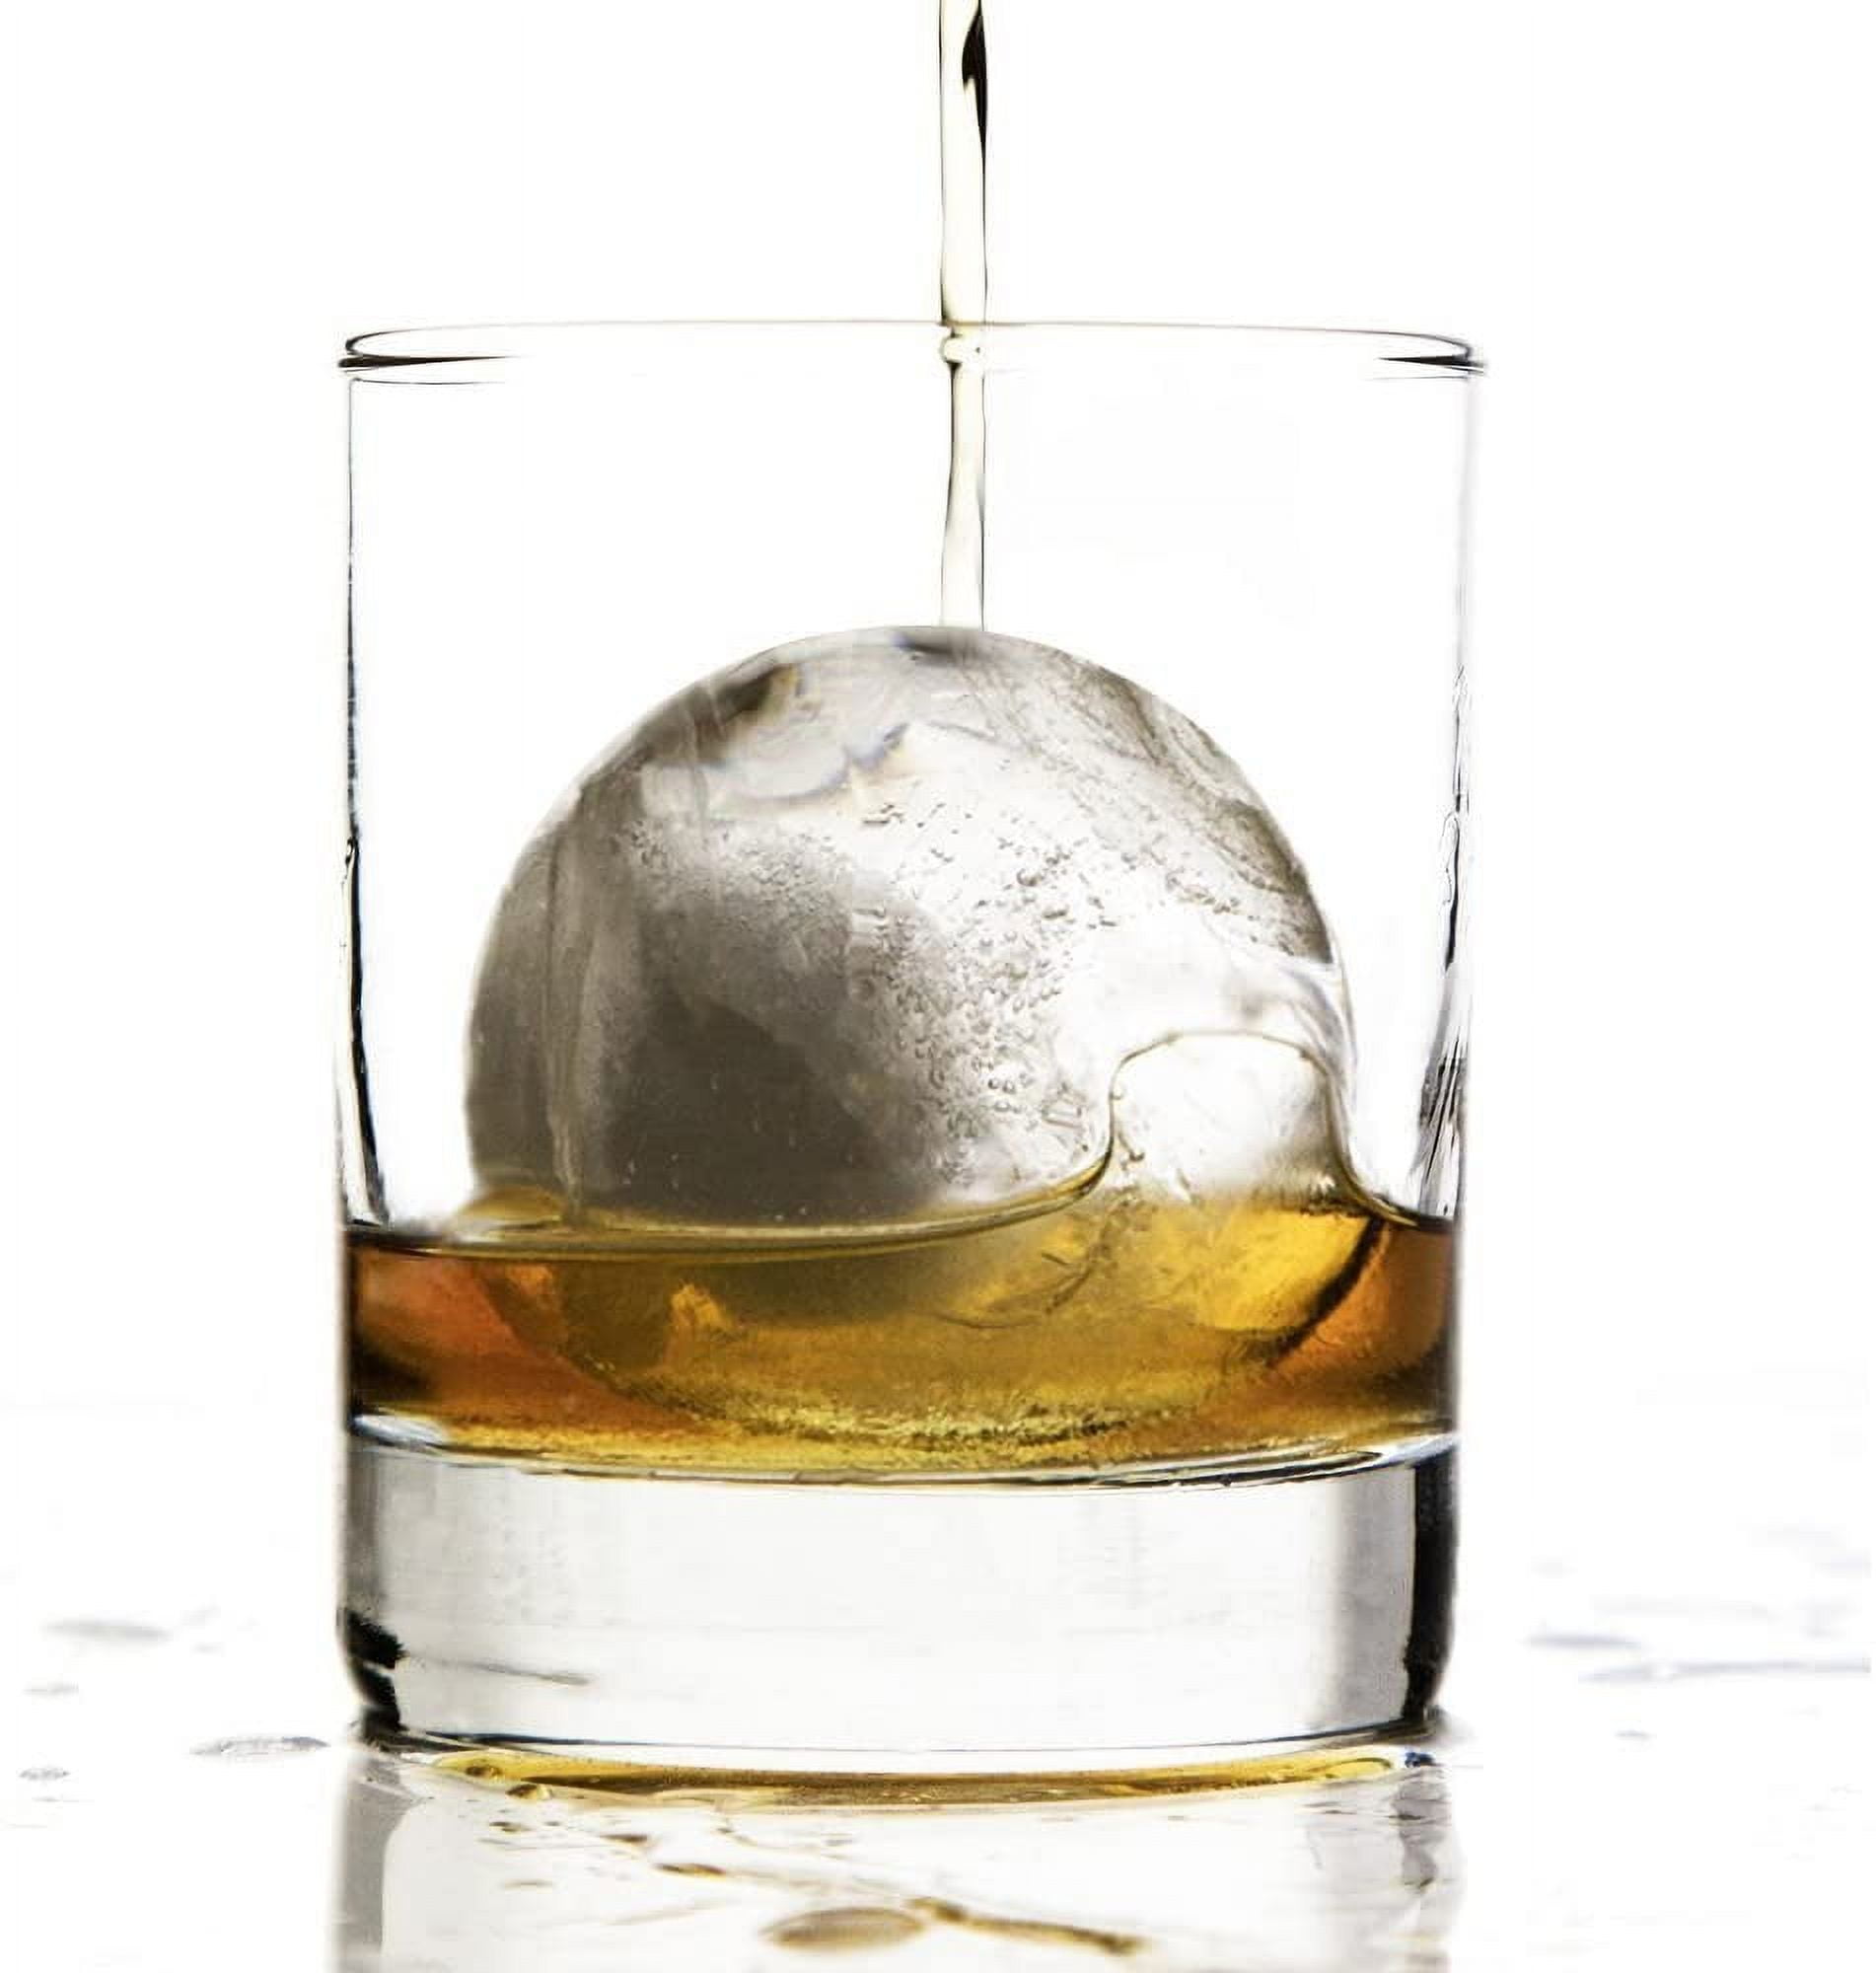 Glacio Clear Ice Ball Maker - Crystal Clear 2.5-inch Ice Spheres - Perfect for Whiskey Enthusiasts and Cocktail Aficionados